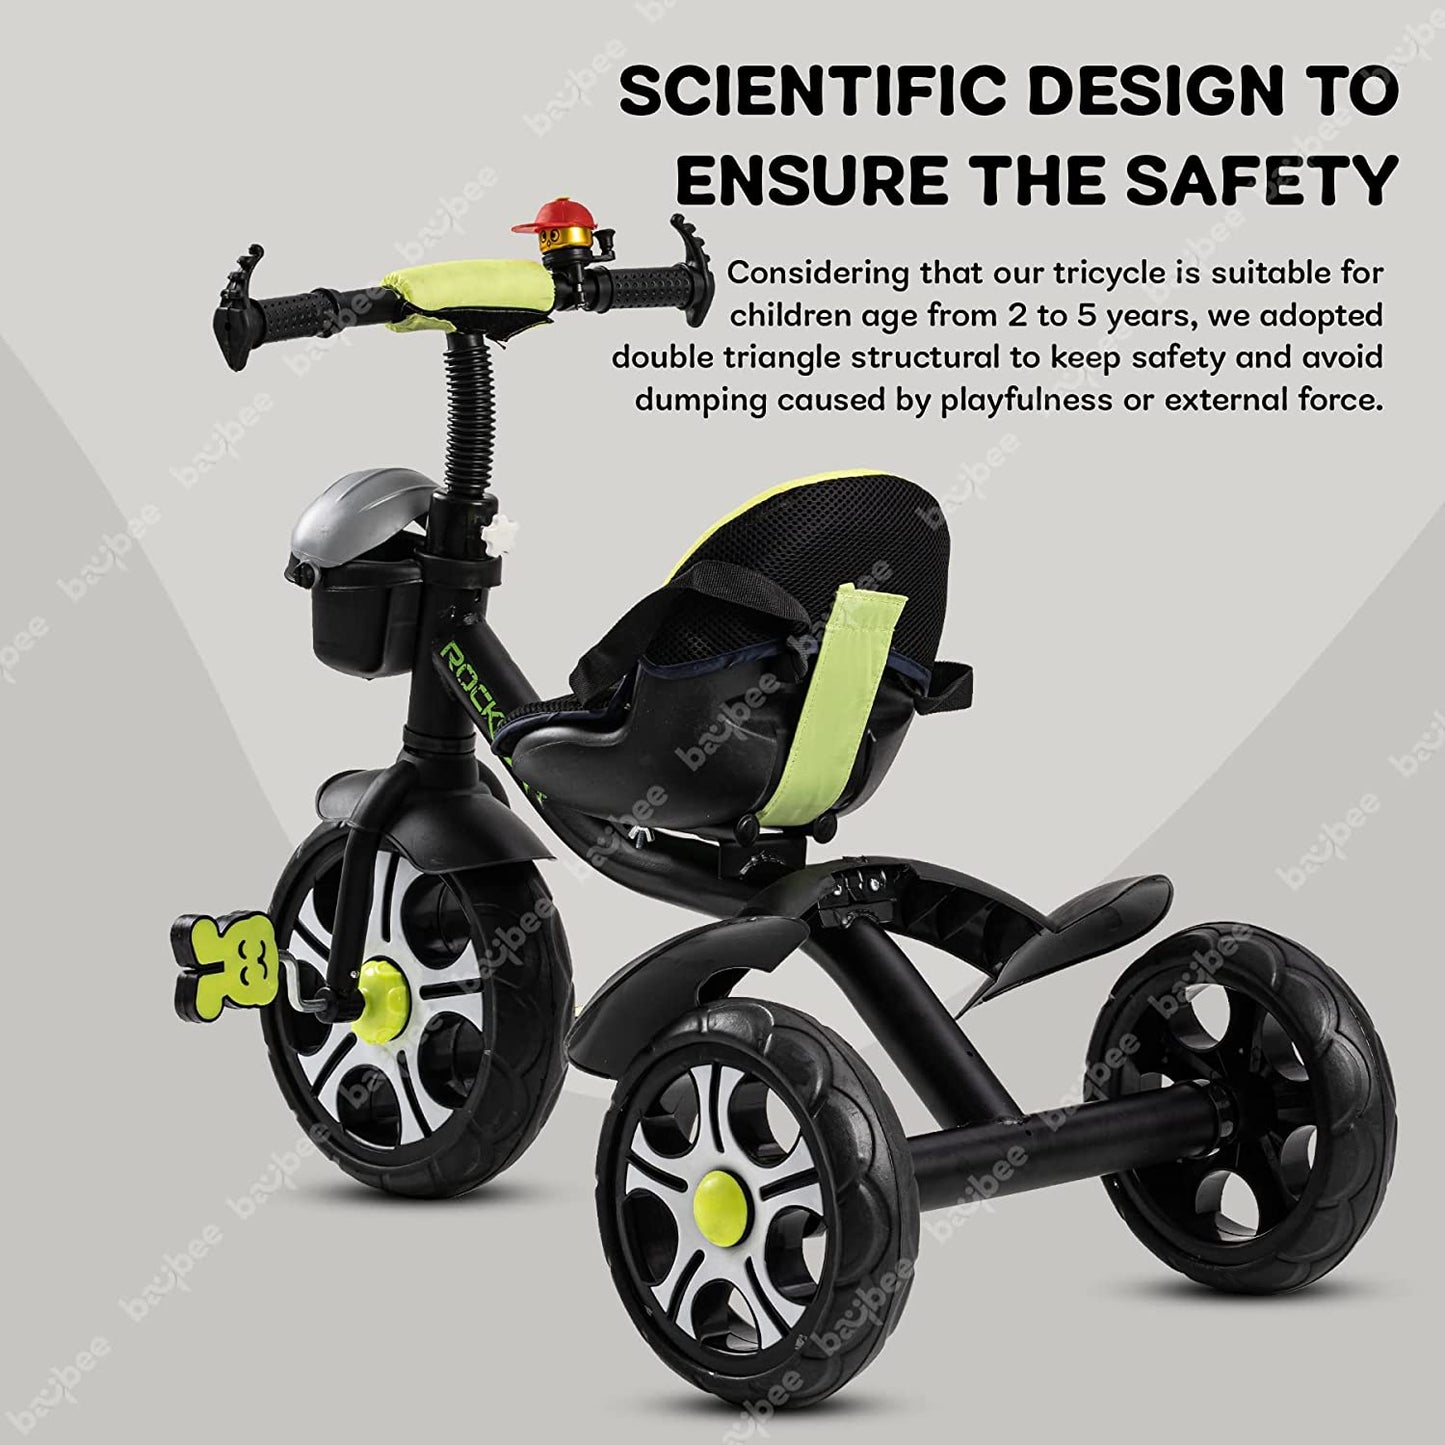 Baybee Rockstar Tricycle for Kids, Smart Plug n Play Kids Cycle Trikes with Basket, Cushion Seat & Safety Belt | Baby Children's Cycle | Baby Tricycle Cycle for Kids 2 to 5 Years Boys Girls